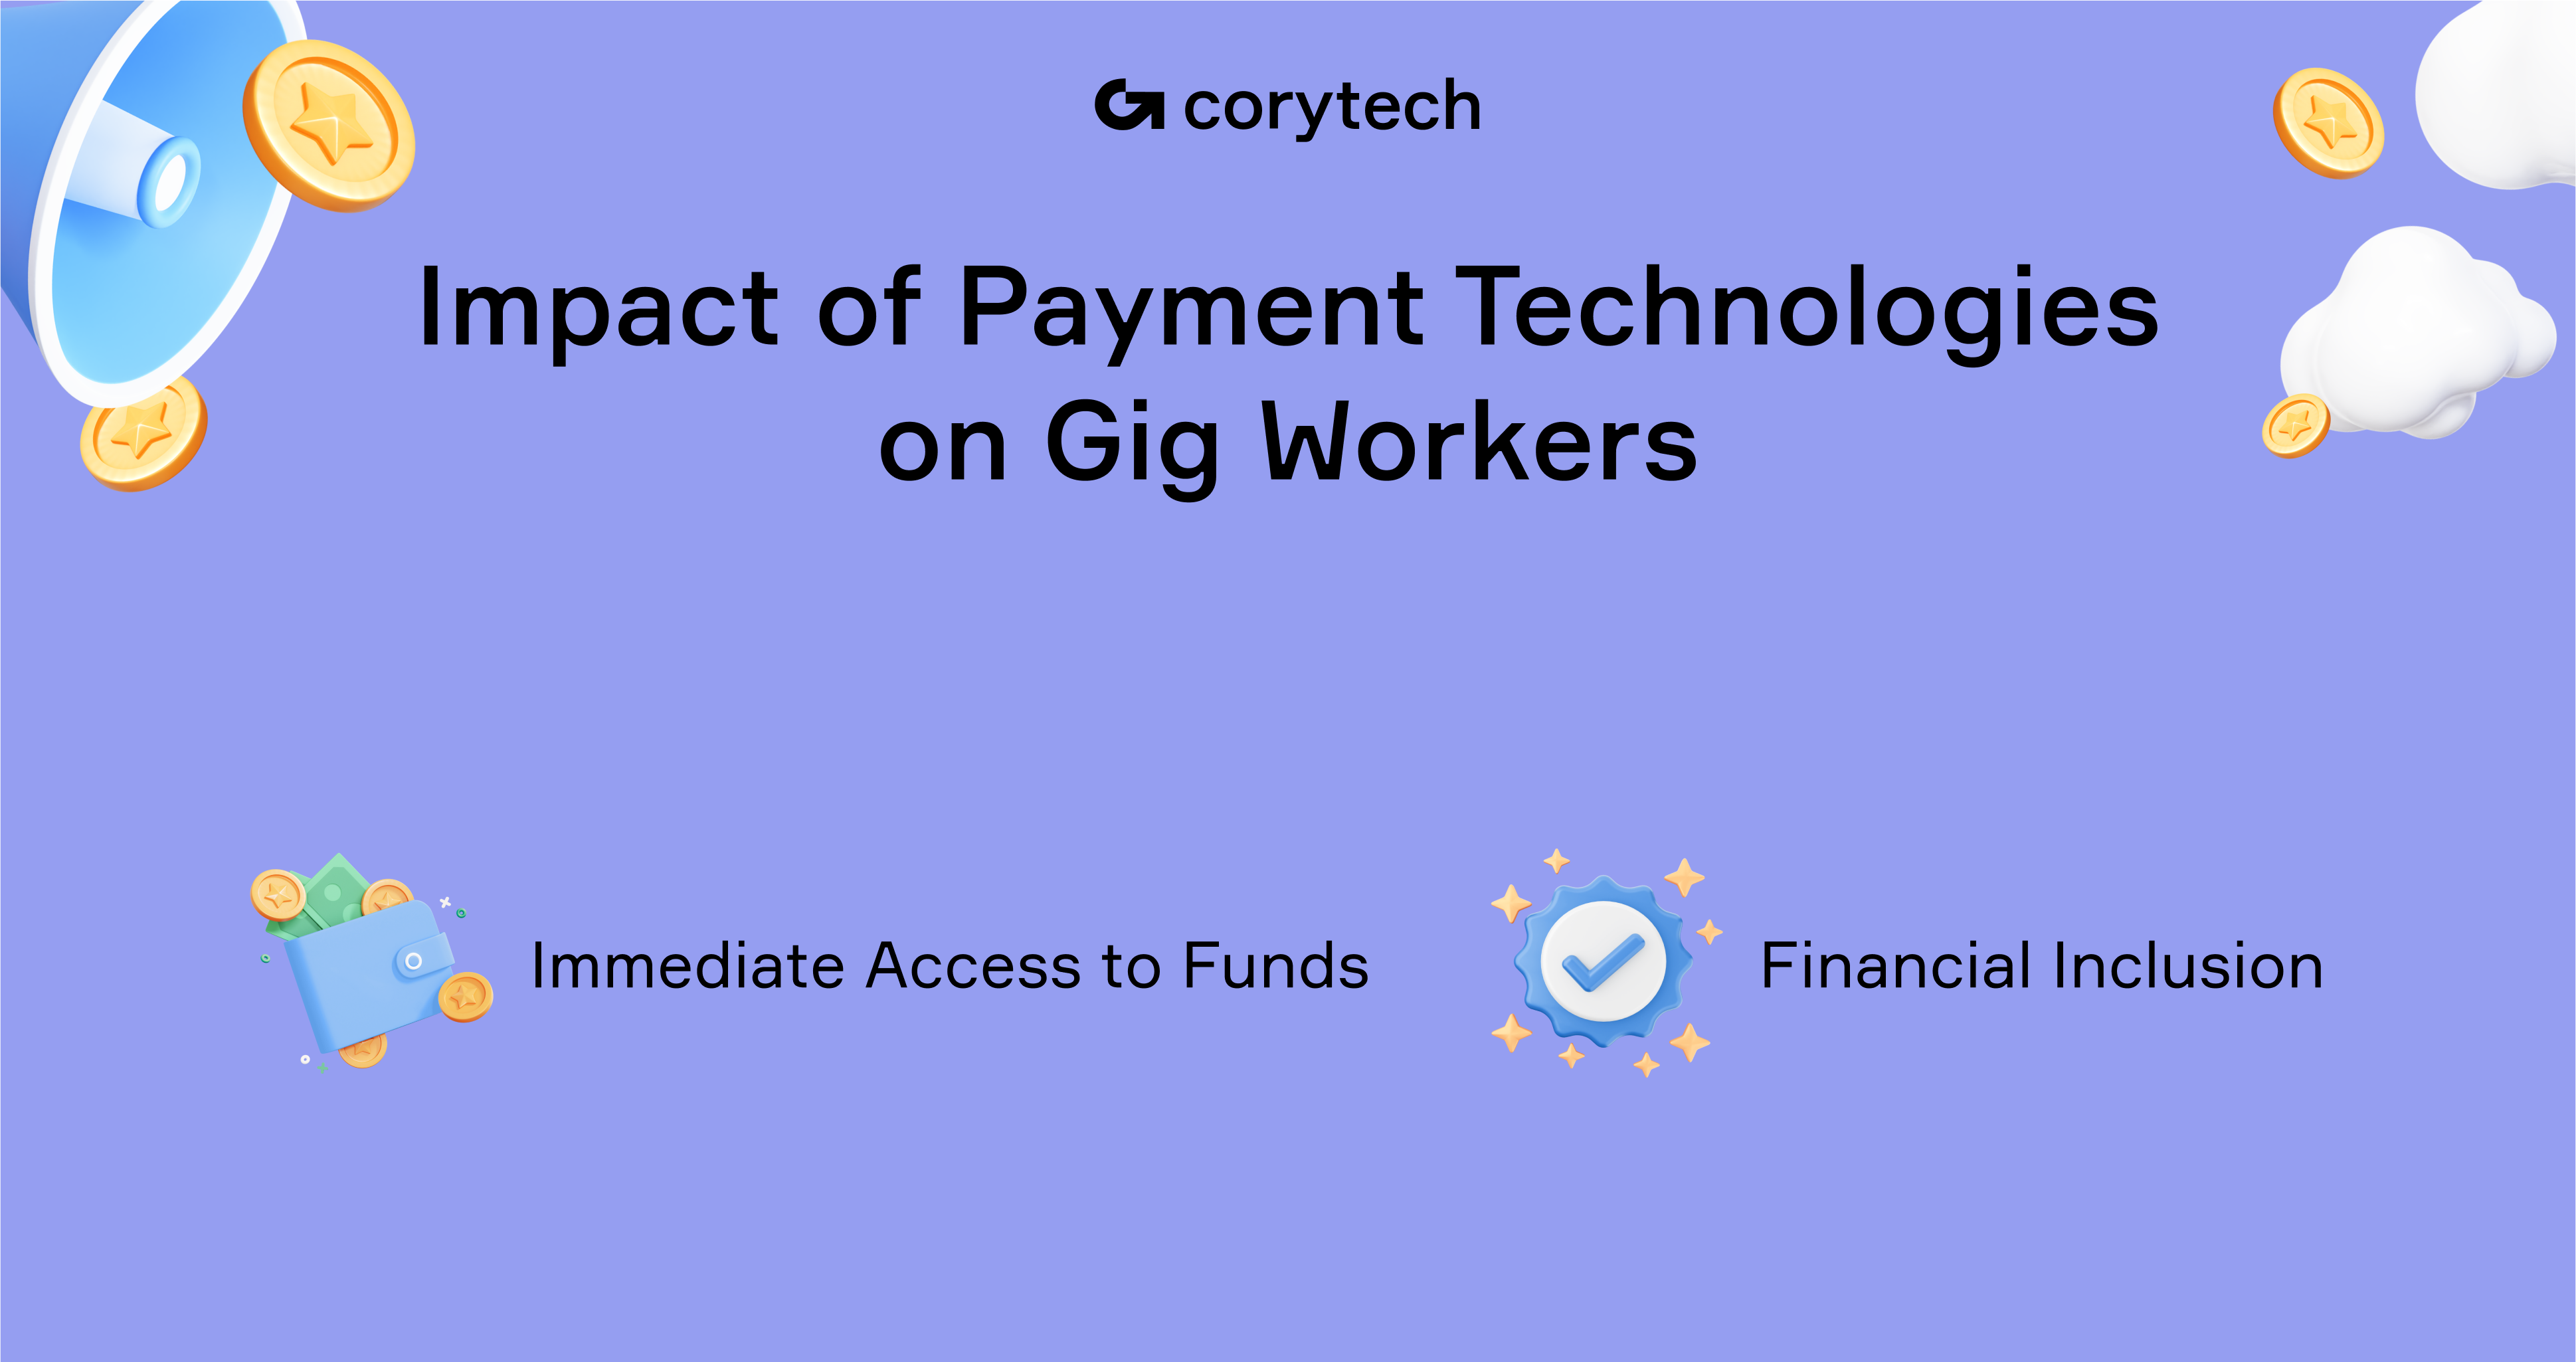 Paytech impact on gig workers